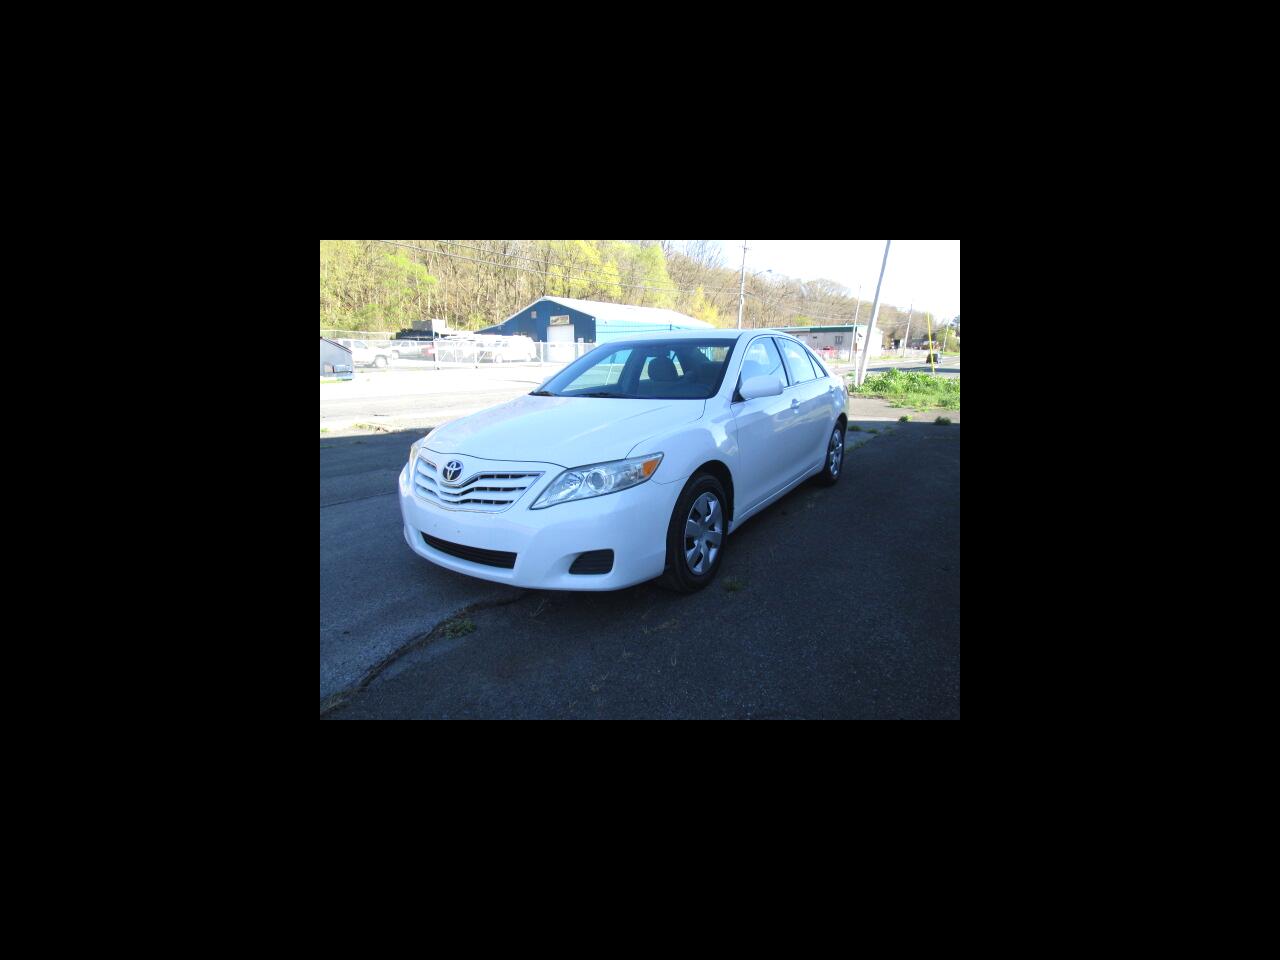 2011 Toyota Camry LE 6-Spd AT